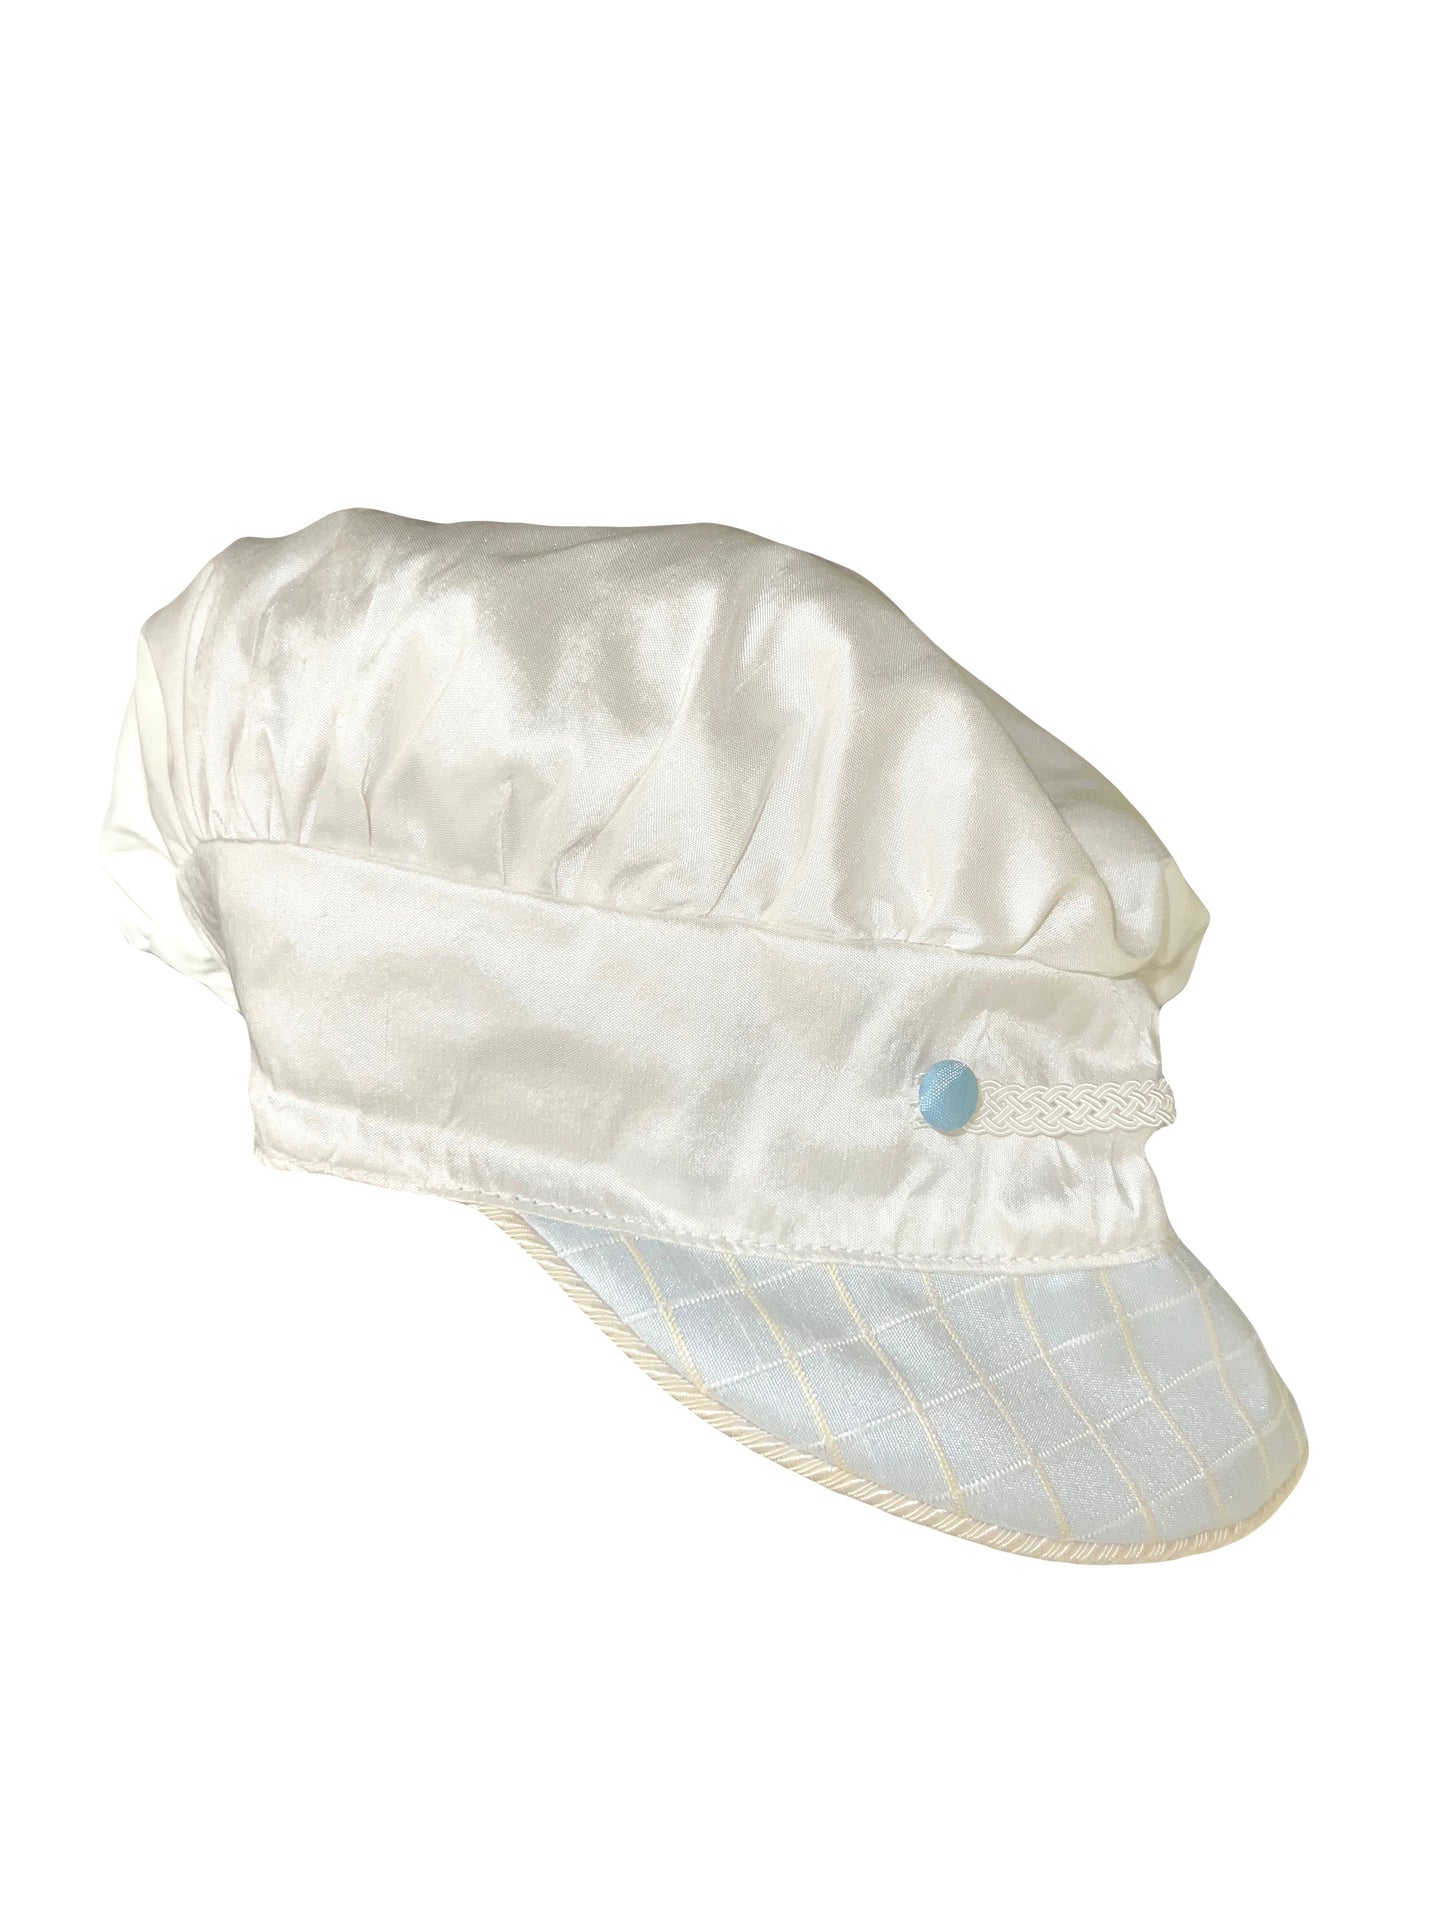 2pc White Silk Checkered Fabric w Light Blue-Knickers w Cabby Hat